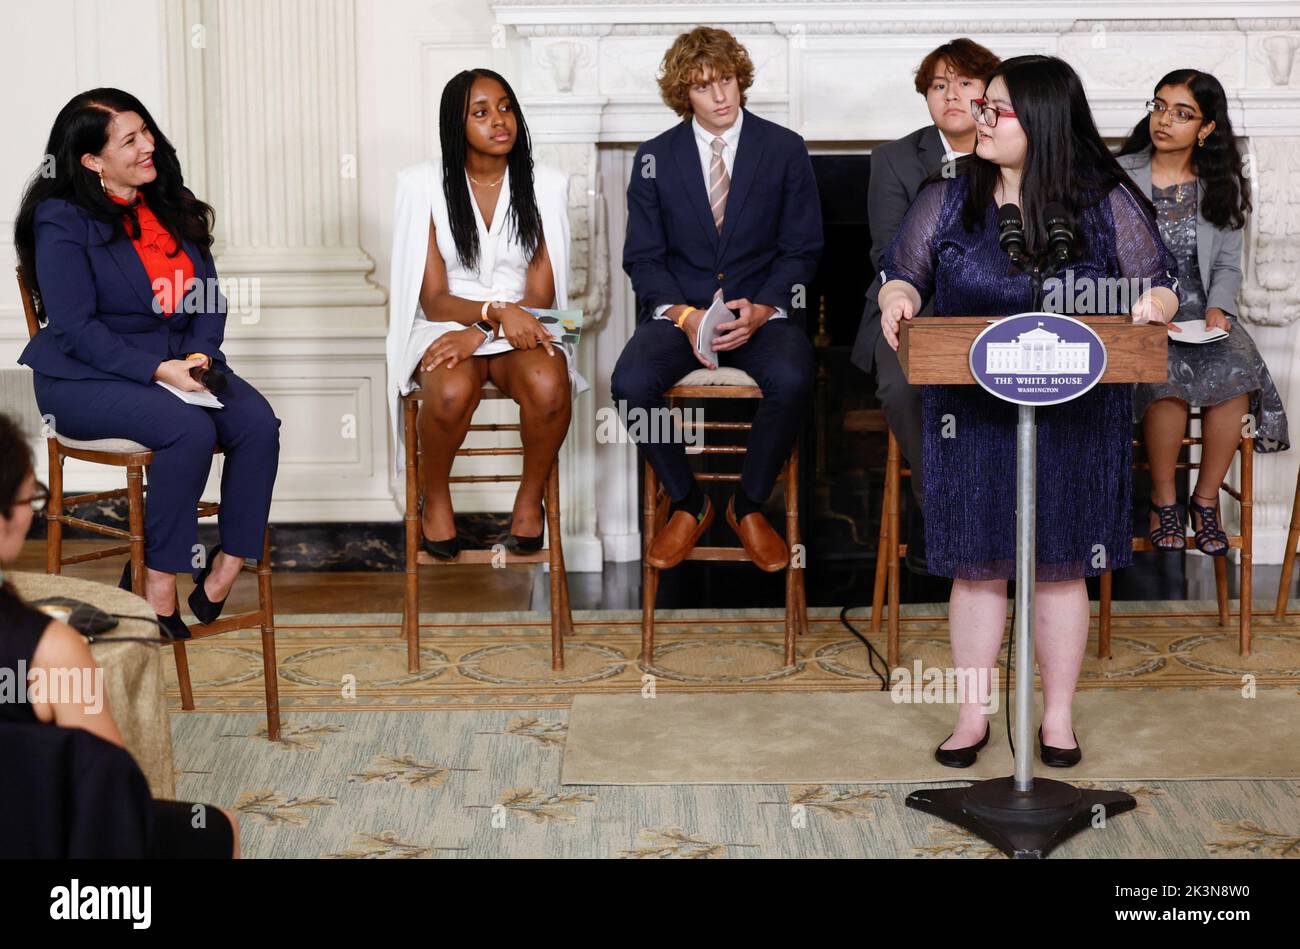 Ada Limon, the 24th Poet Laureate of the United States, asks Diane Sun, a junior at Interlake High School in Bellevue, Washington, a question about her poem during an event honoring the Class of 2022 National Student Poets Program, at the White House in Washington, U.S., September 27, 2022. REUTERS/Evelyn Hockstein Stock Photo